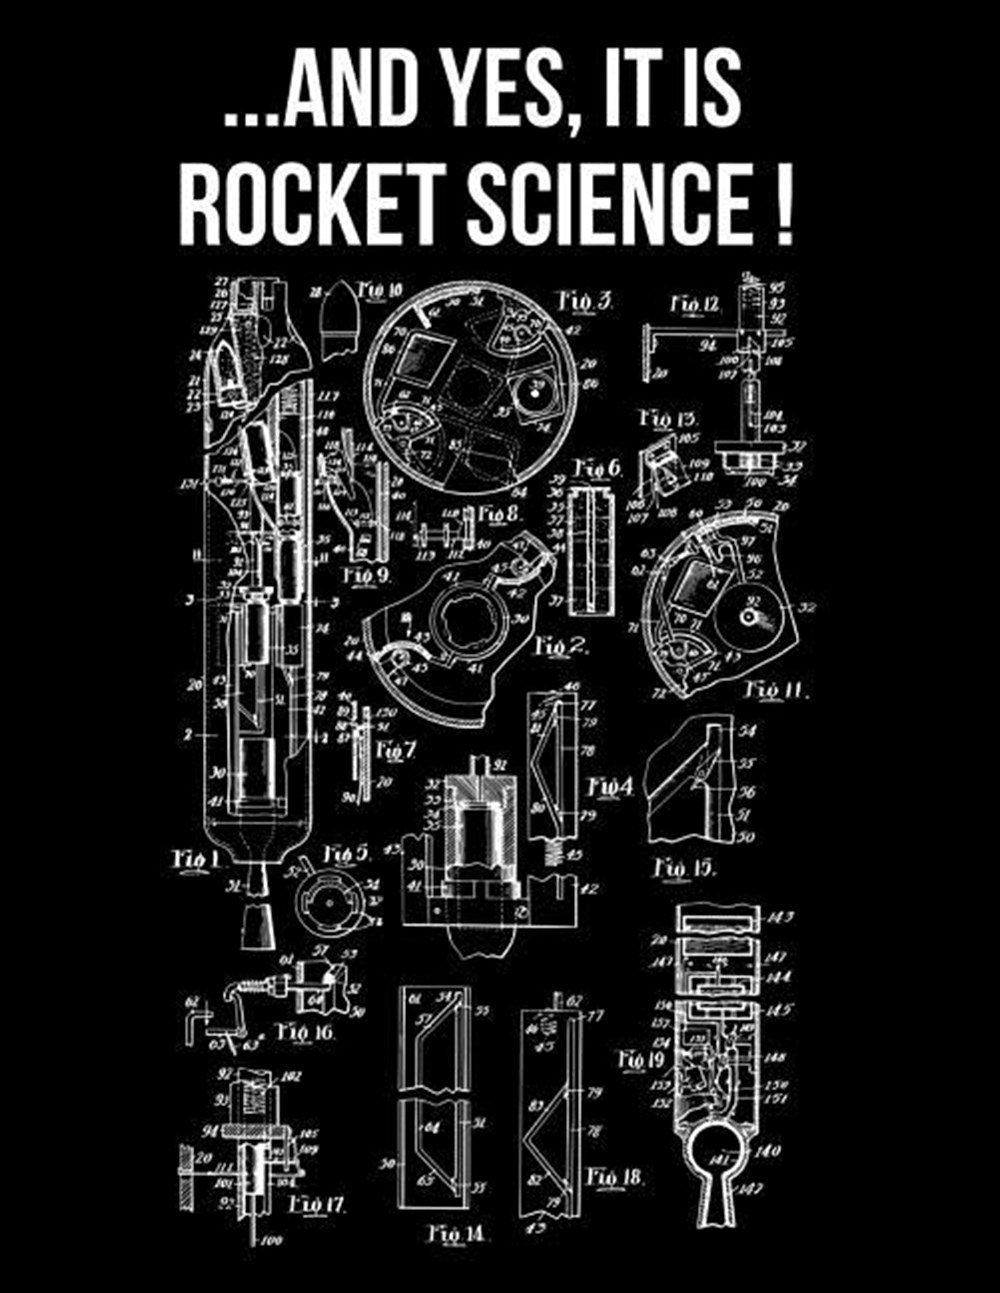 ... And Yes It Is Rocket Science! Blank Sheet Music 150 pages 8.5 x 11 in. 12 Staves Per Page Music 